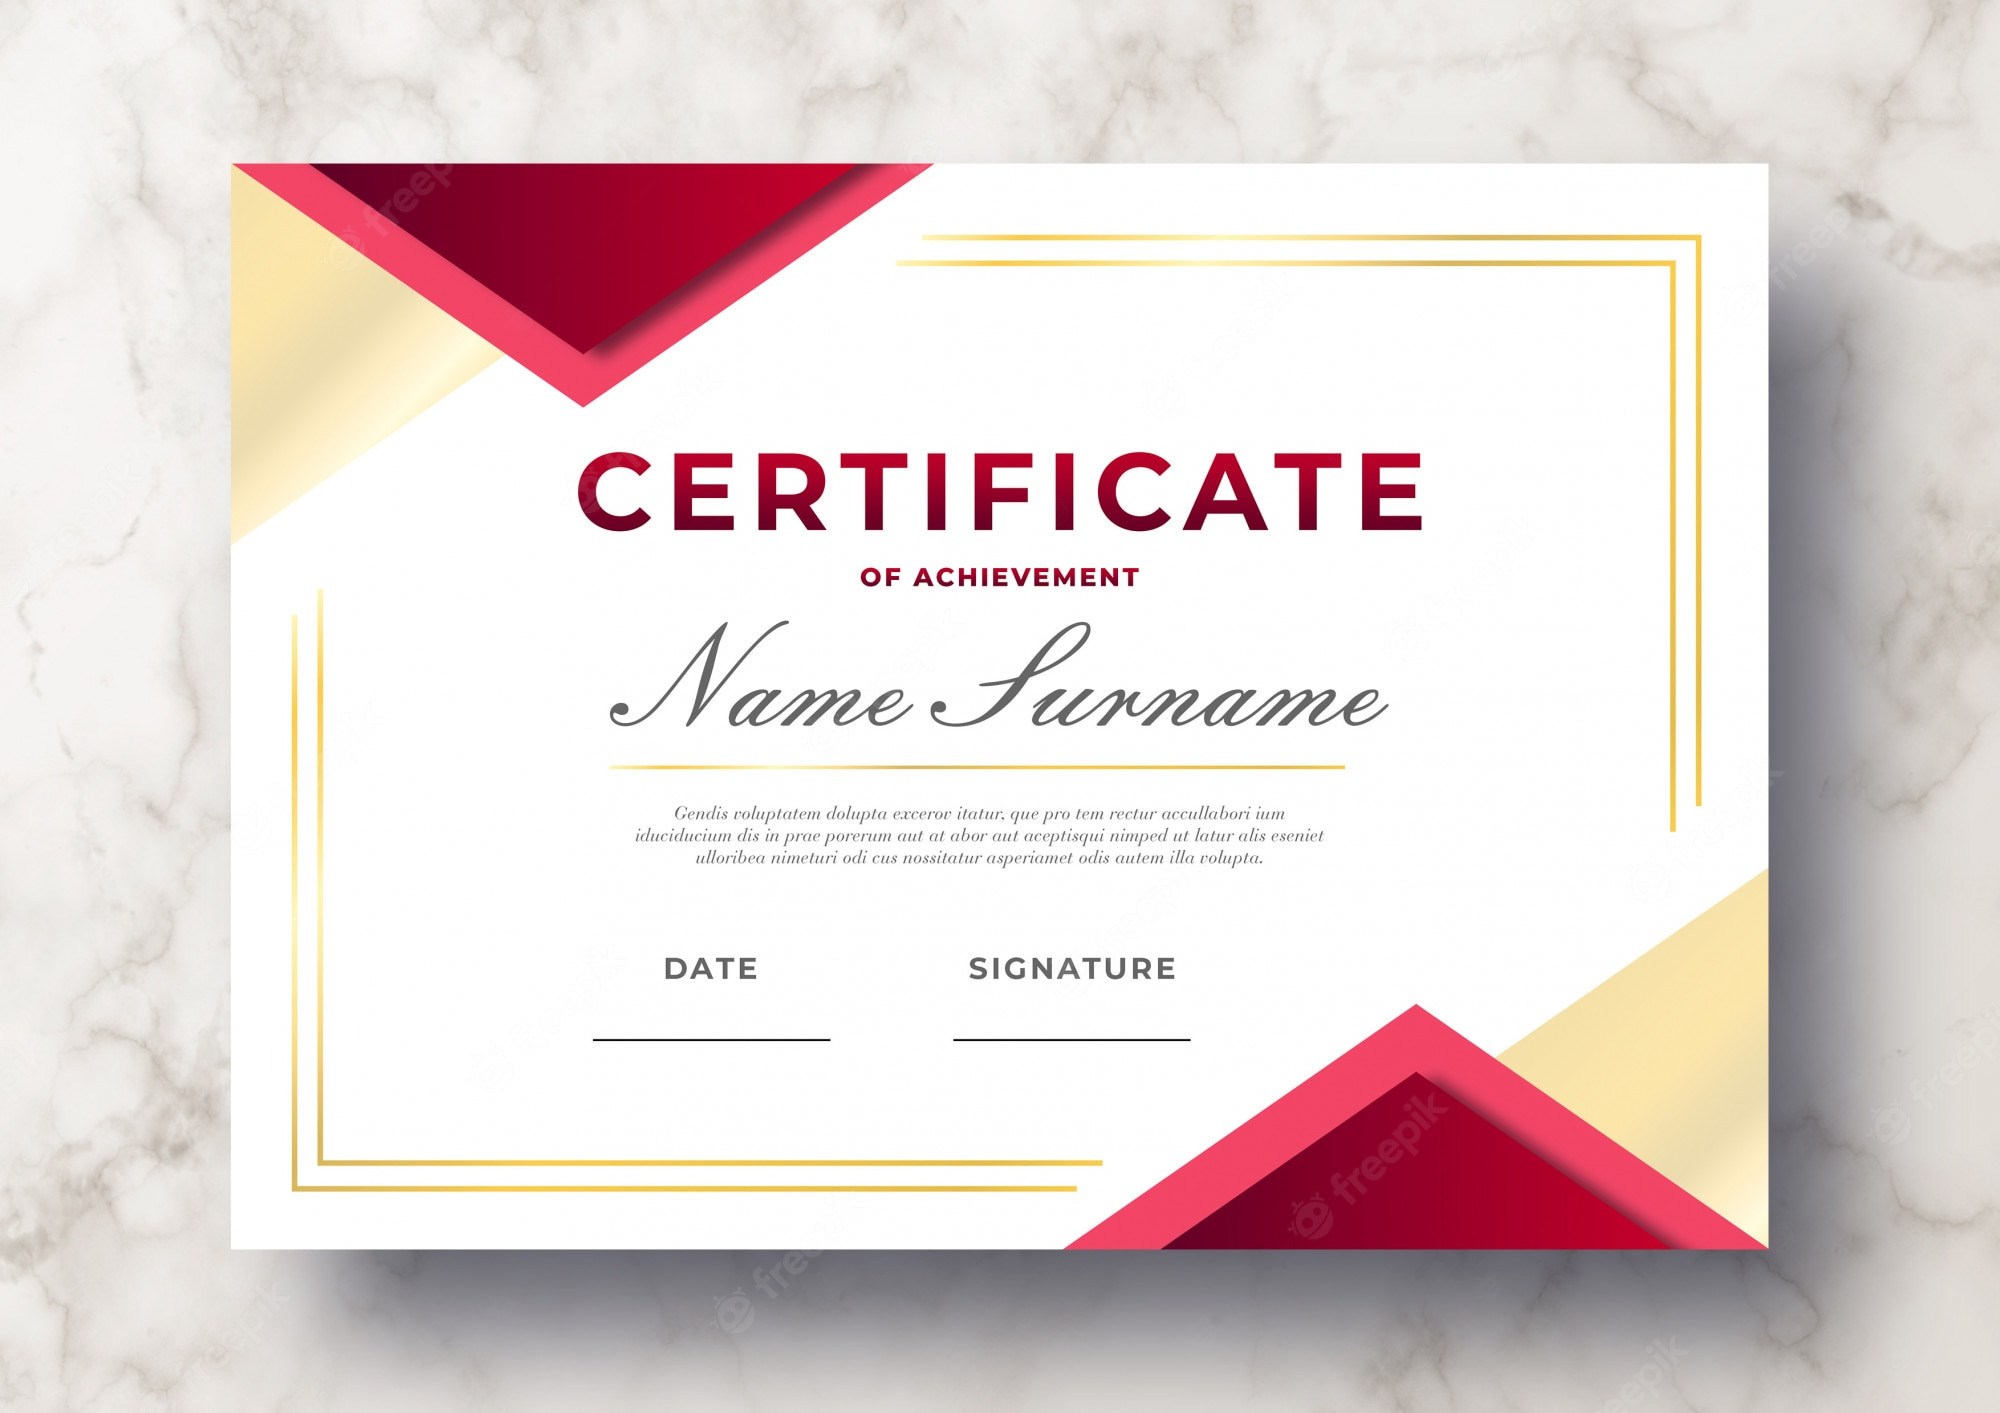 Award certificate Images  Free Vectors, Stock Photos & PSD Within Pageant Certificate Template